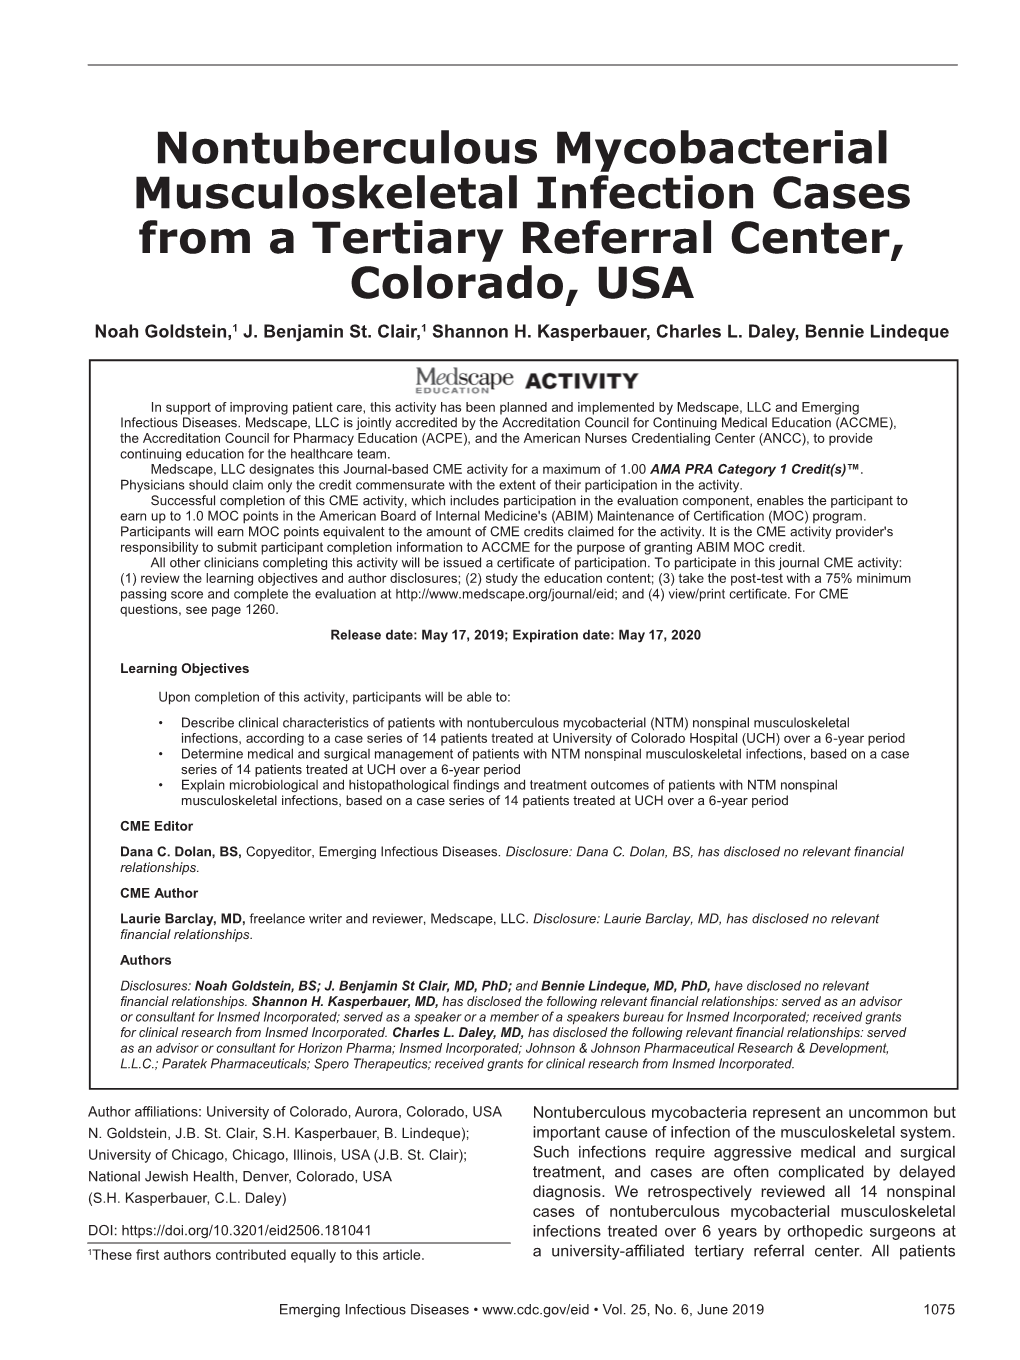 Nontuberculous Mycobacterial Musculoskeletal Infection Cases from a Tertiary Referral Center, Colorado, USA Noah Goldstein,1 J